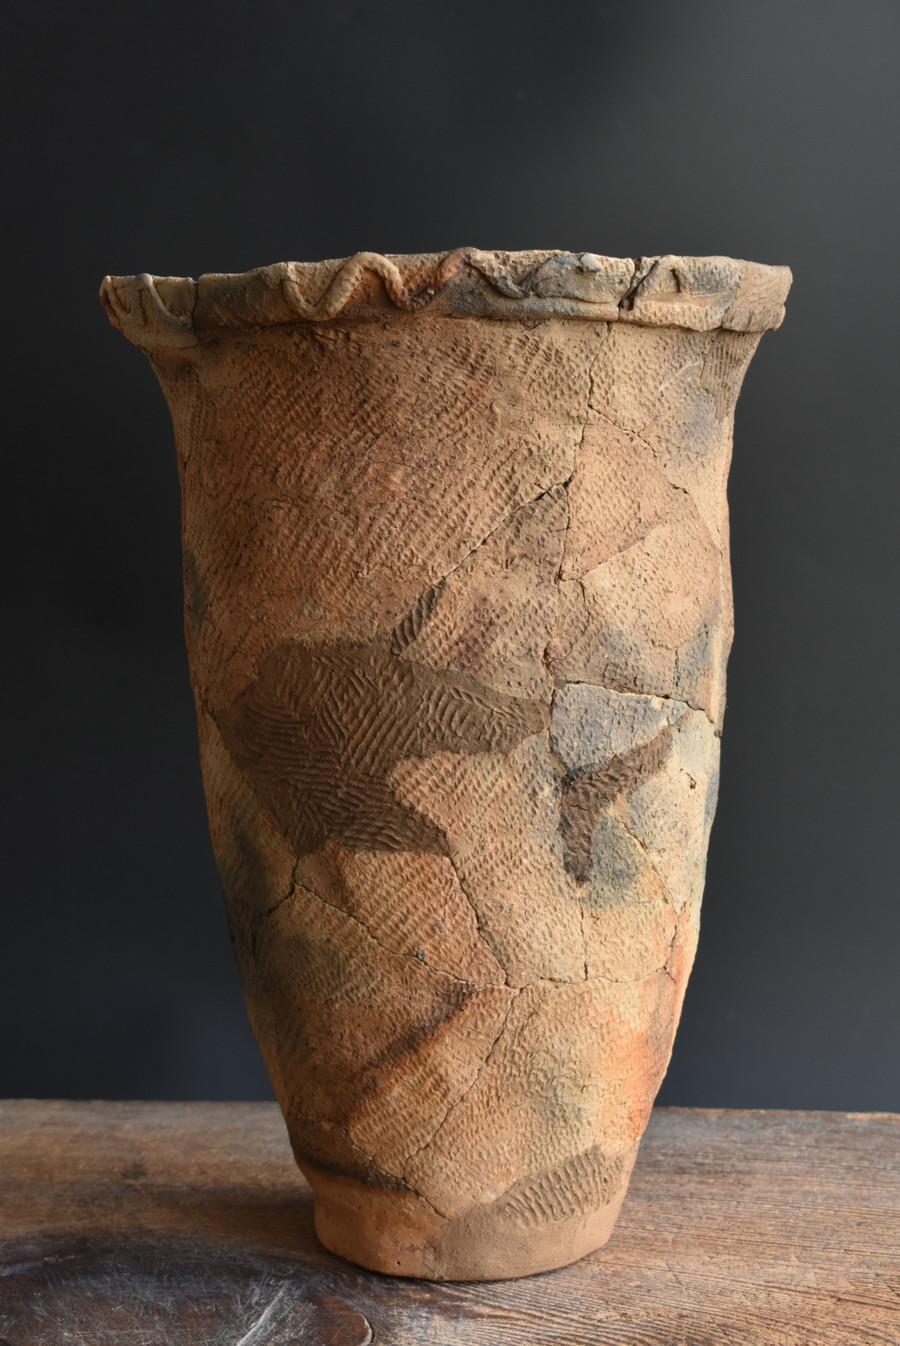 18th Century and Earlier Very Old Japanese Earthenware / Antique Wabi Sabi Vase / before 9th Century